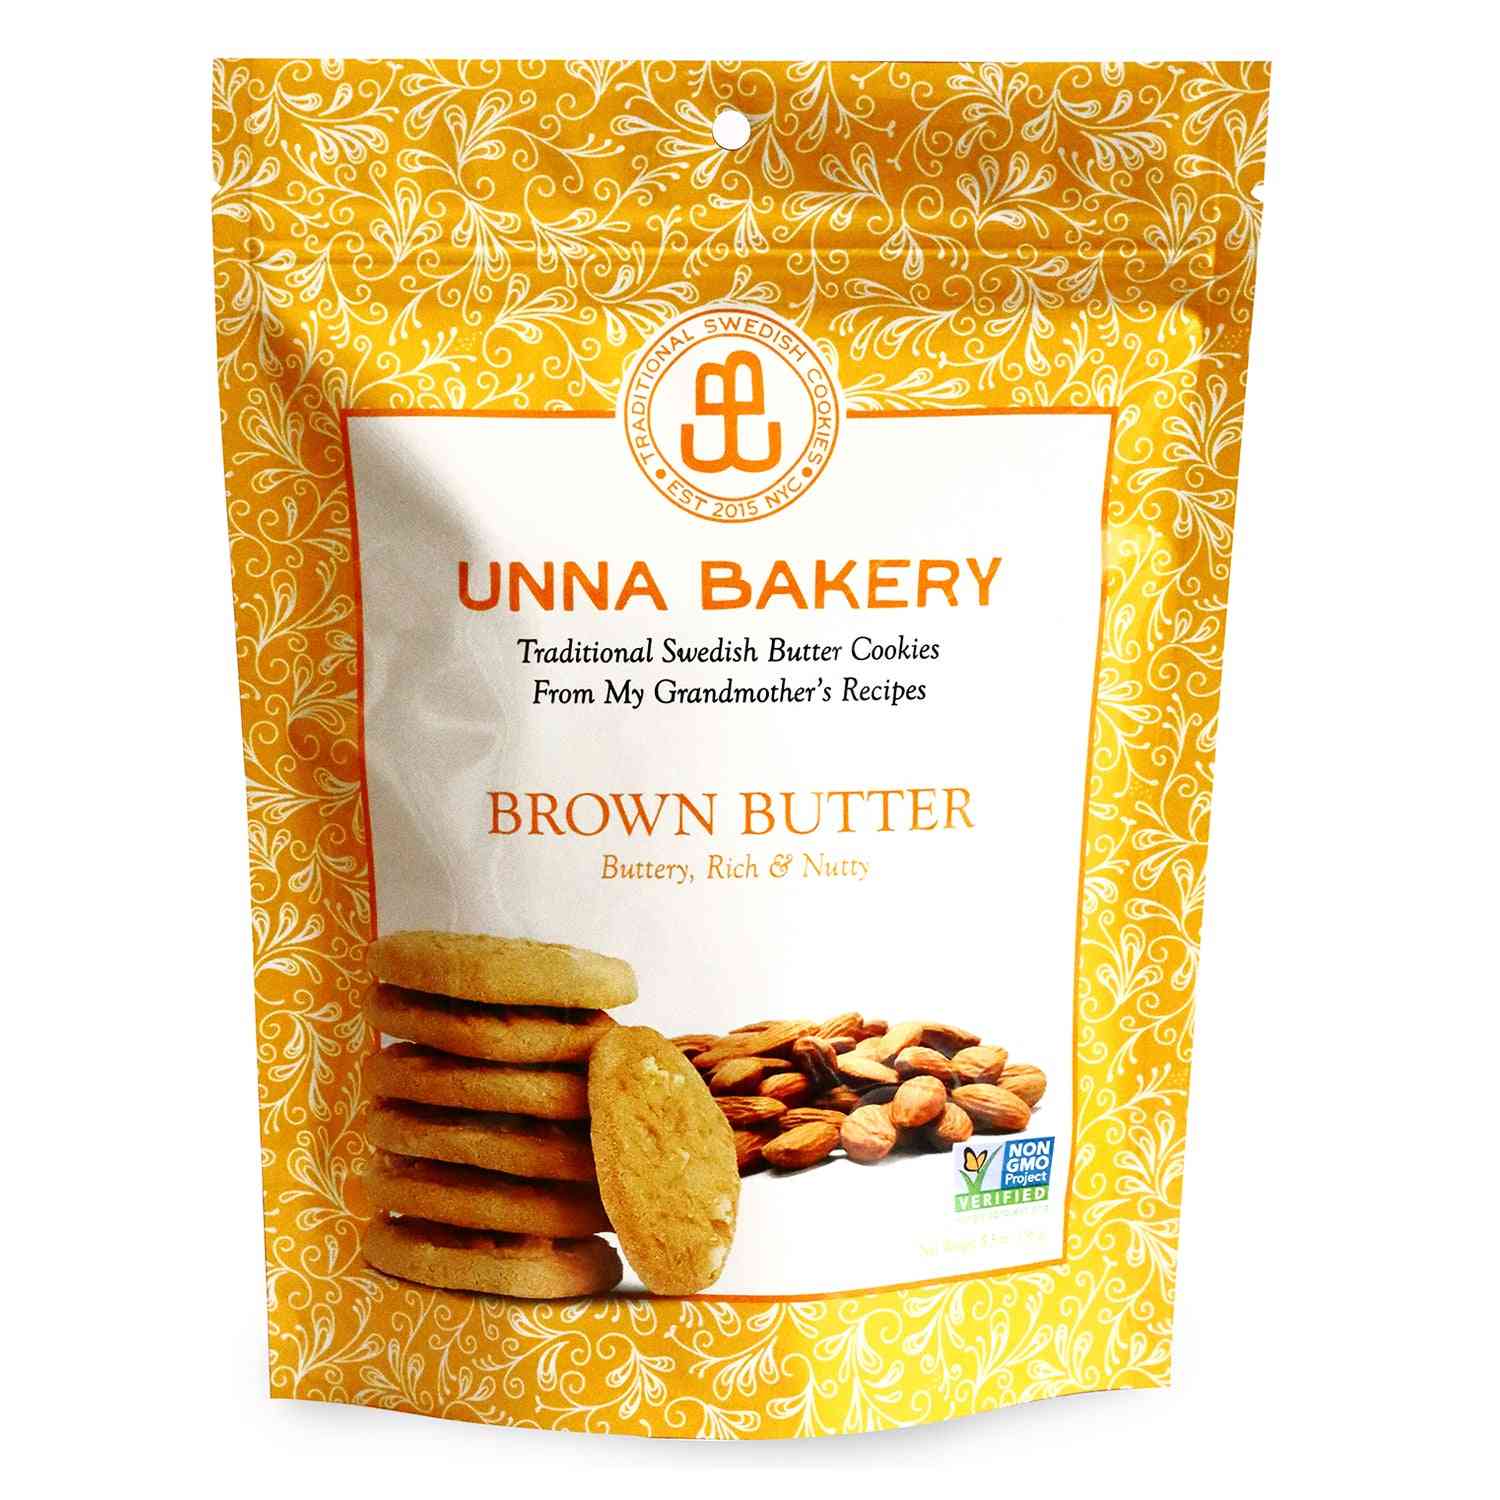 Brown Butter Cookies 5.5 Oz From Unna Bakery